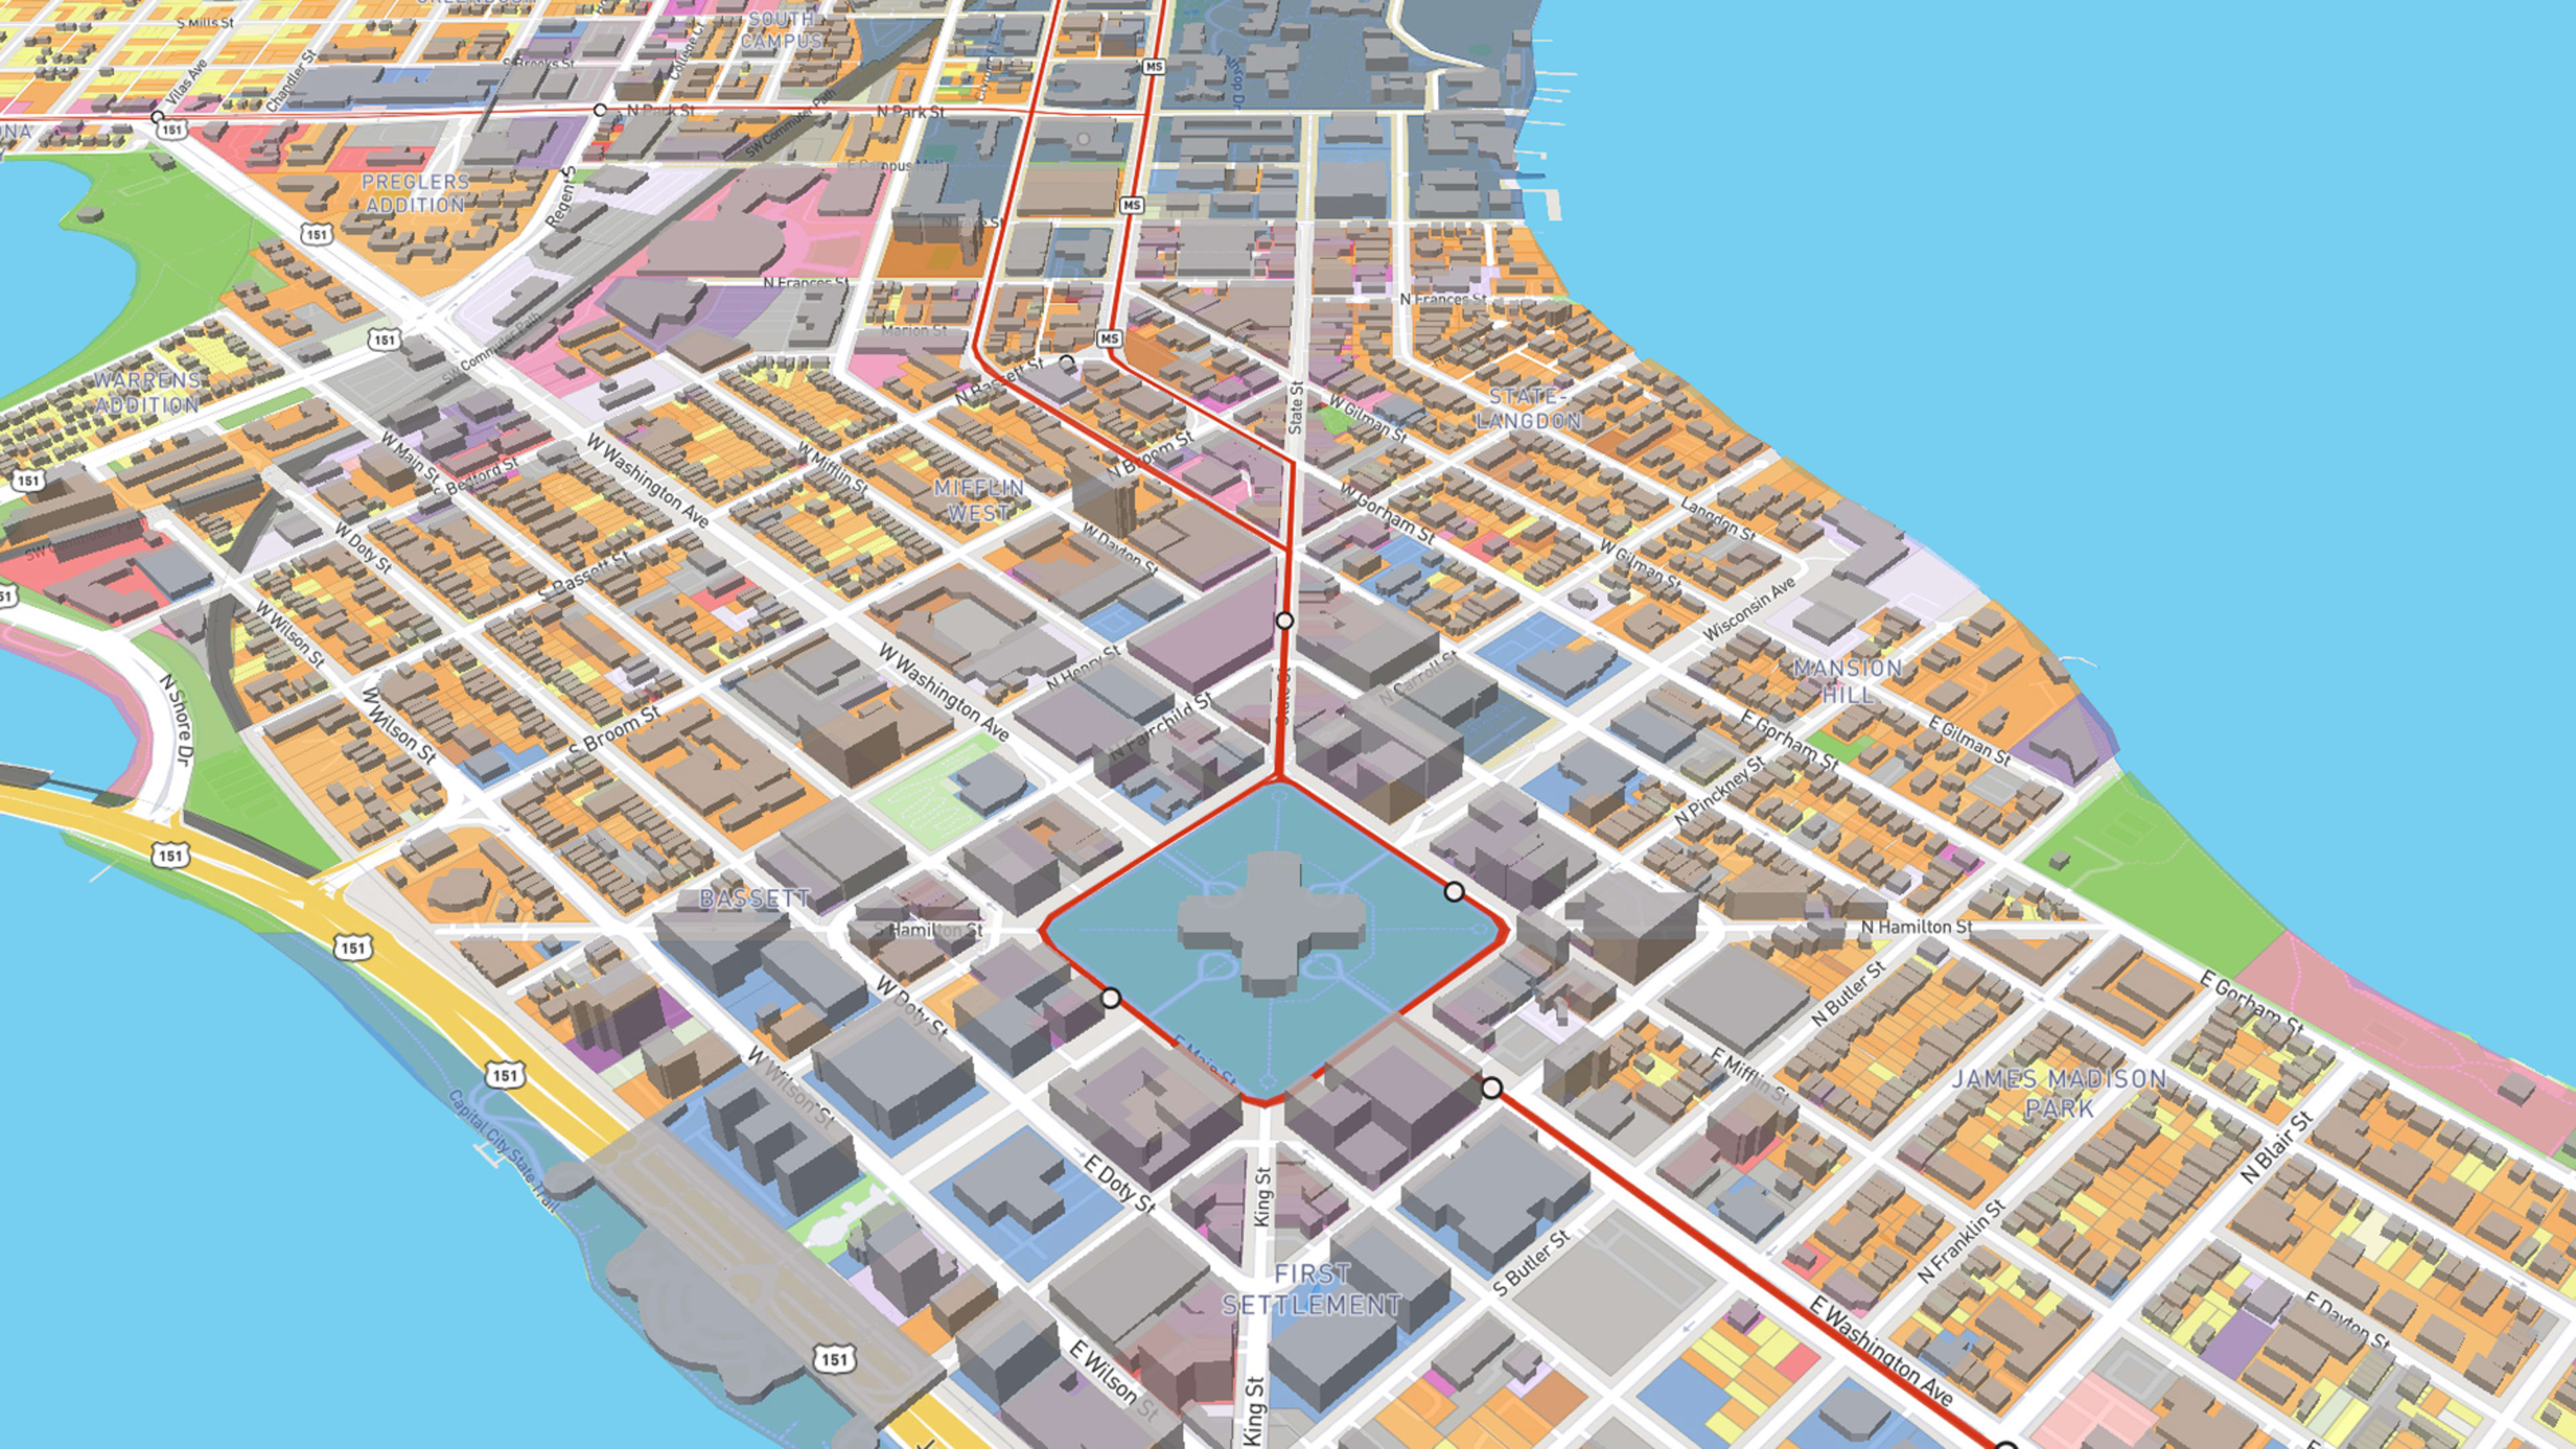 This SimCity-Like Tool Lets Urban Planners See The Potential Impact Of Their Ideas